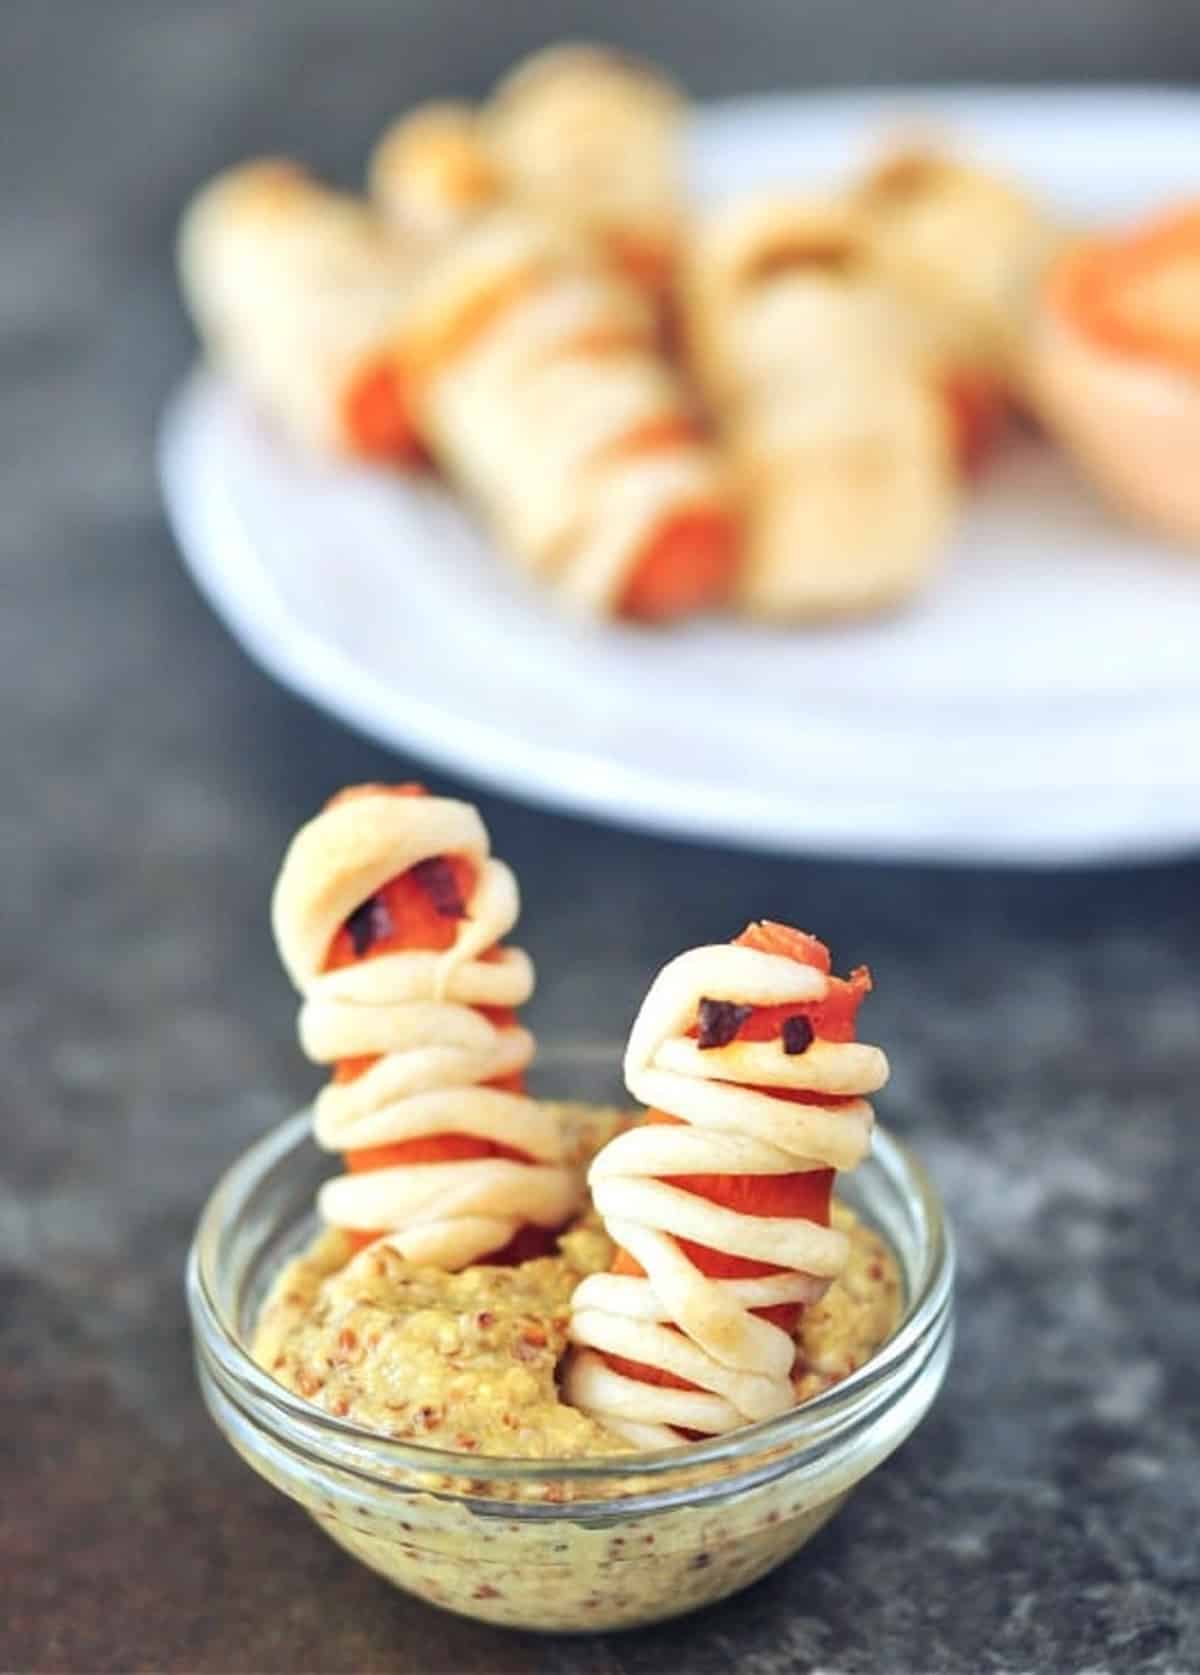 Mini carrots wrapped in pastry to look like mummies for Halloween sit on a serving plate with small glass bowls of hot sauce and mustard. Two "mummies" stand inside the bowl of mustard.